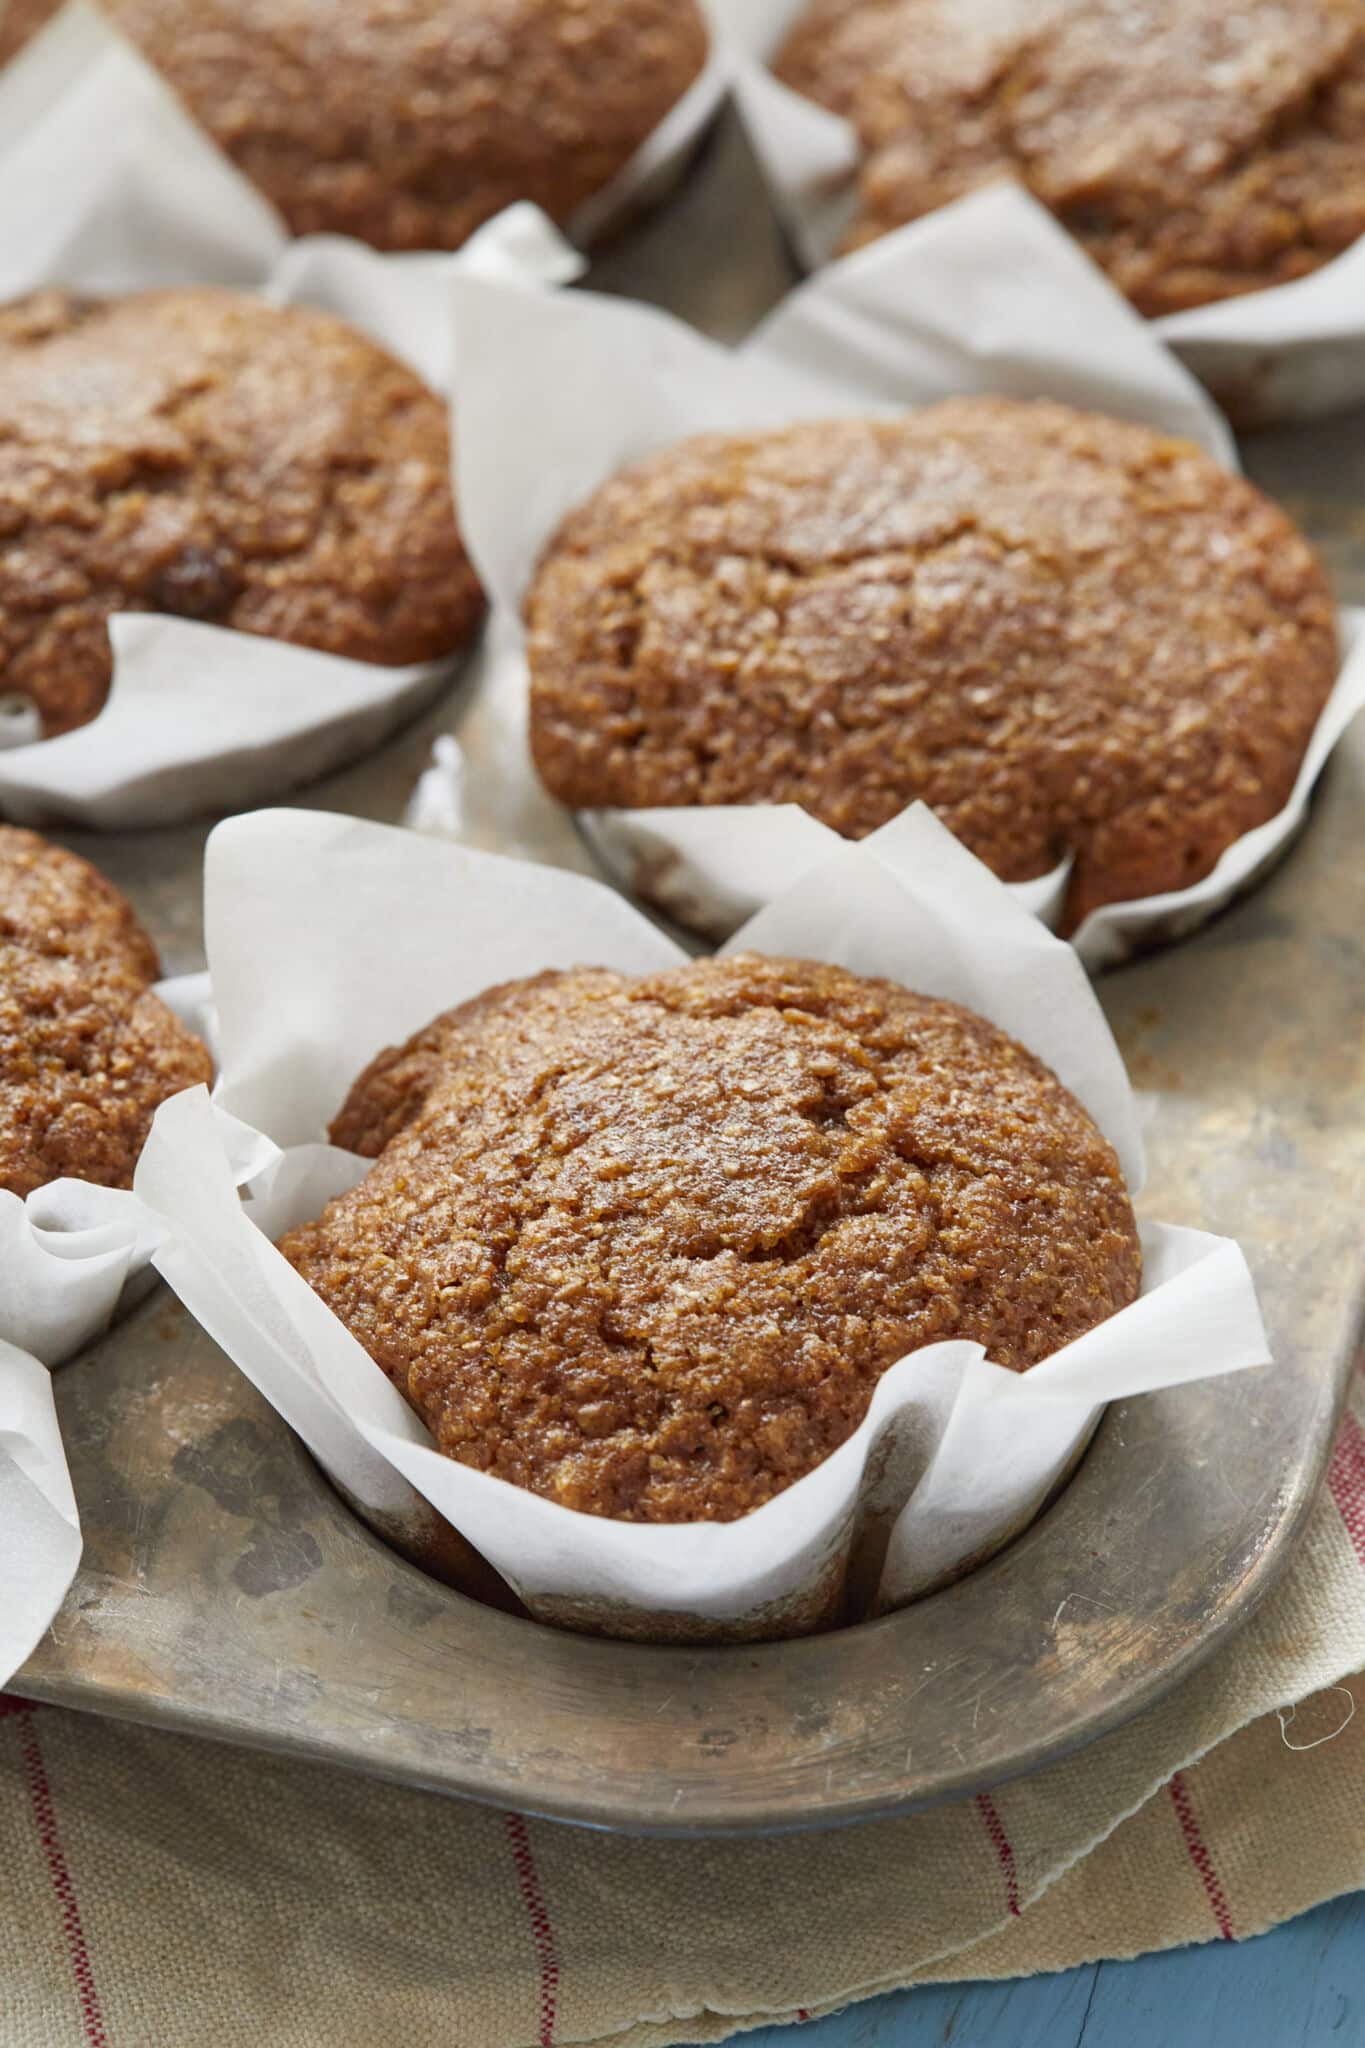 Healthy Bran Muffins are baked perfectly in liners in the muffin tin. They look moist, soft and packed with raisins. 